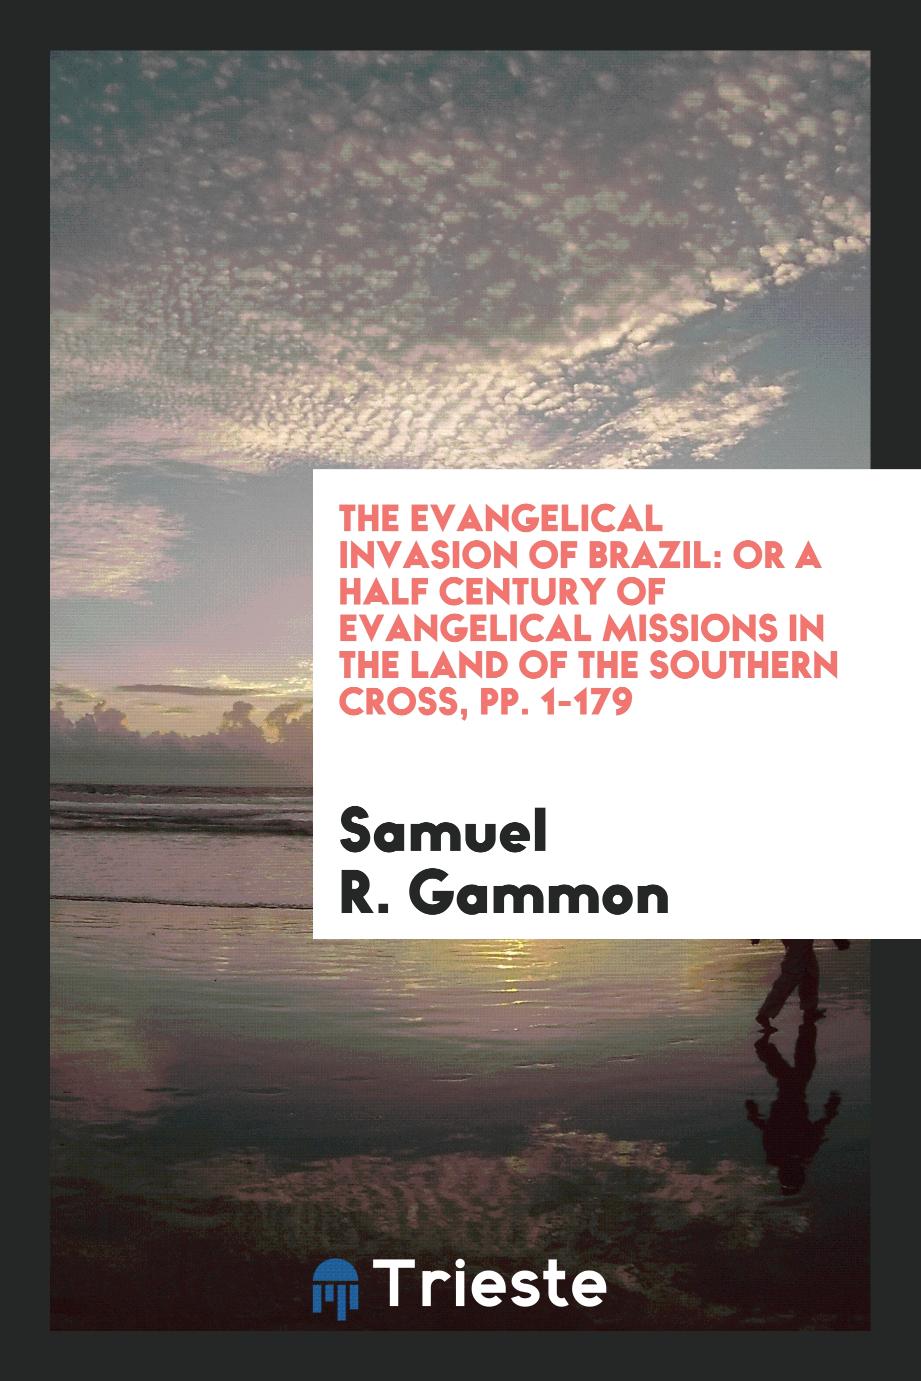 The Evangelical Invasion of Brazil: Or a Half Century of Evangelical Missions in the Land of the Southern Cross, pp. 1-179